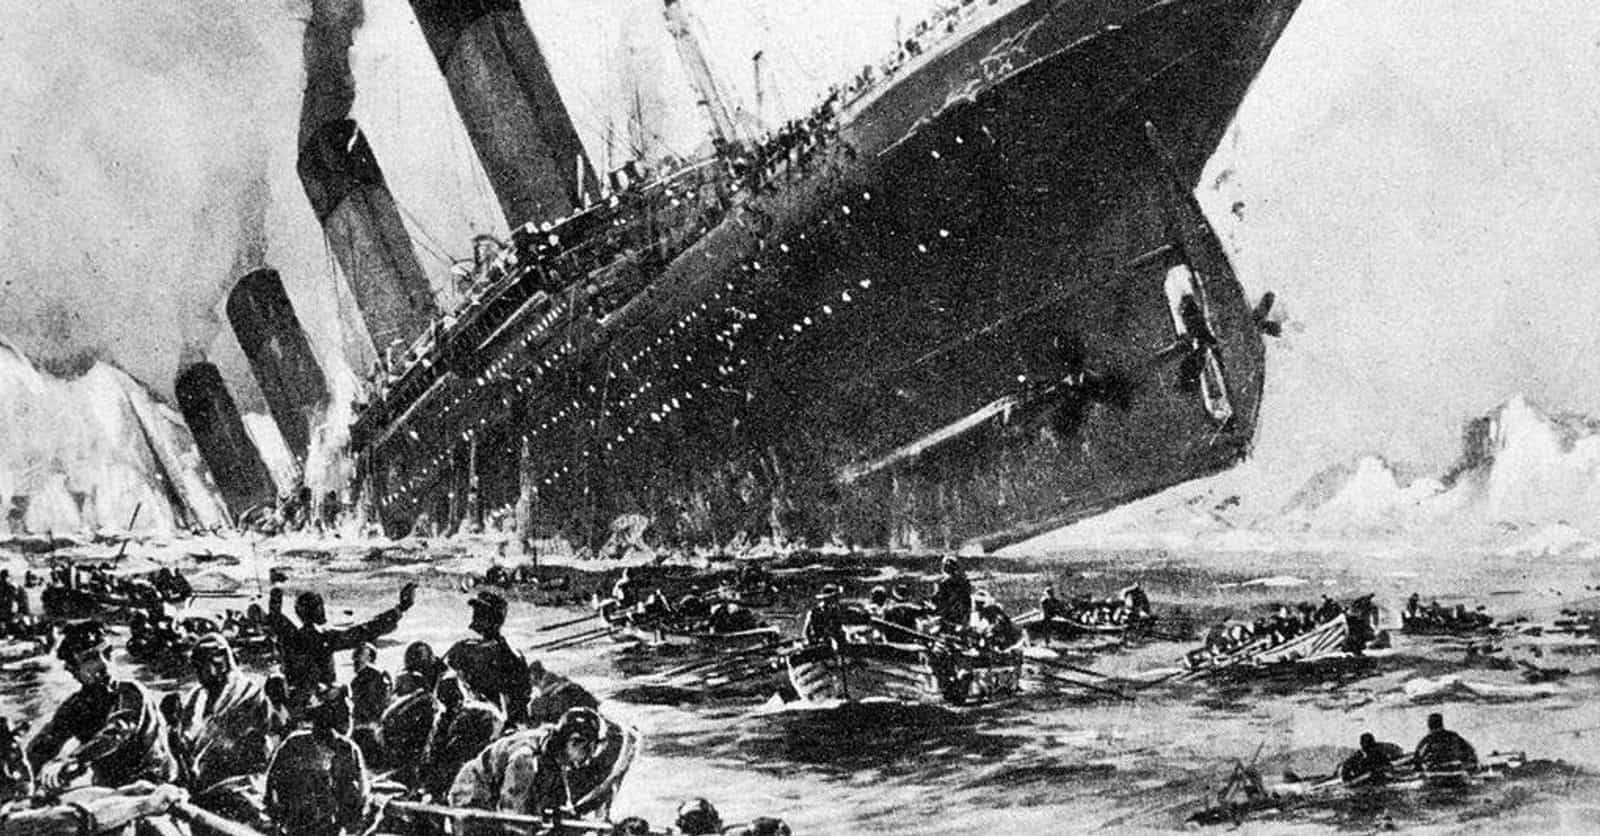 They're Rebuilding The 'Titanic' And You Can Go On Its Maiden Voyage